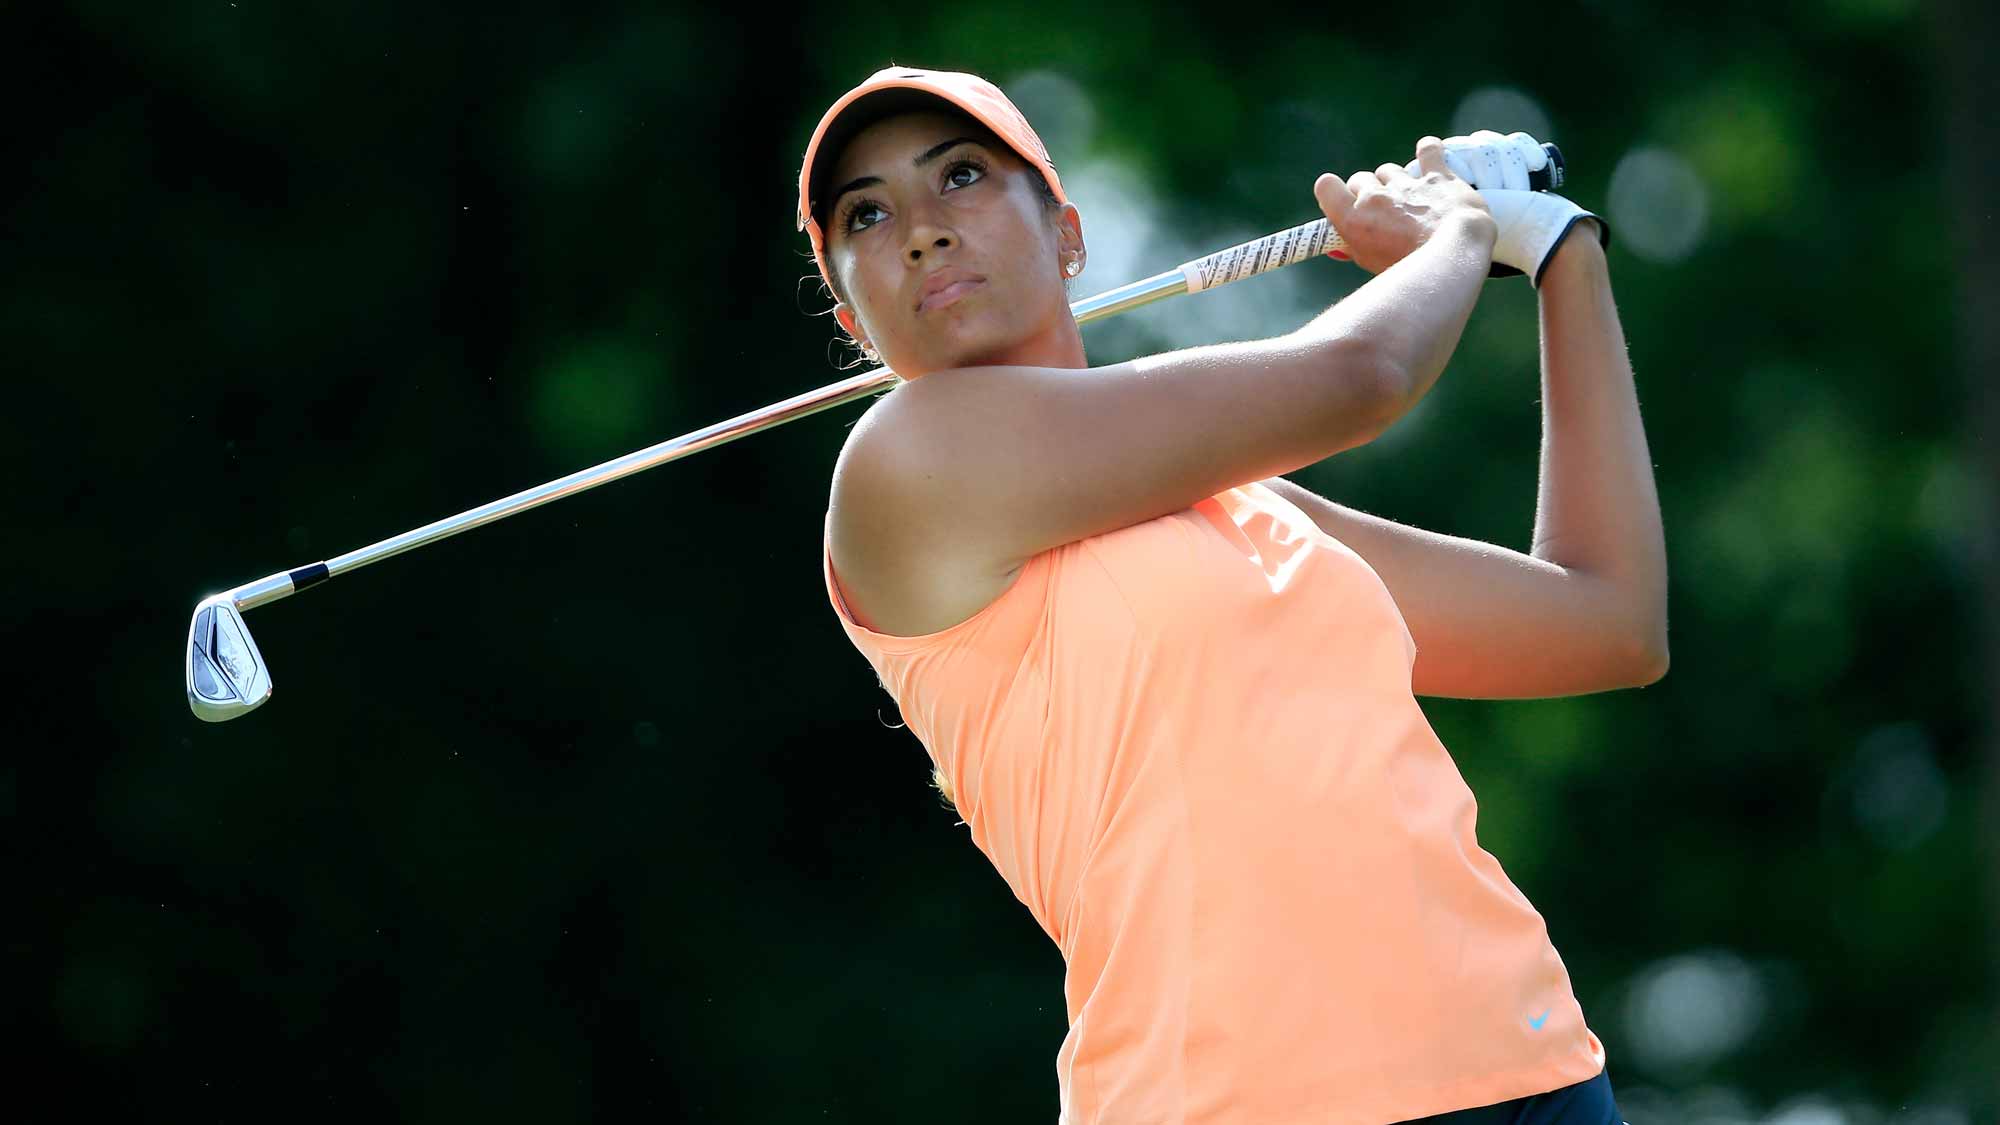 Cheyenne Woods of the United States plays a shot on the third hole during the first round of the Walmart NW Arkansas Championship Presented by P&G at Pinnacle Country Club